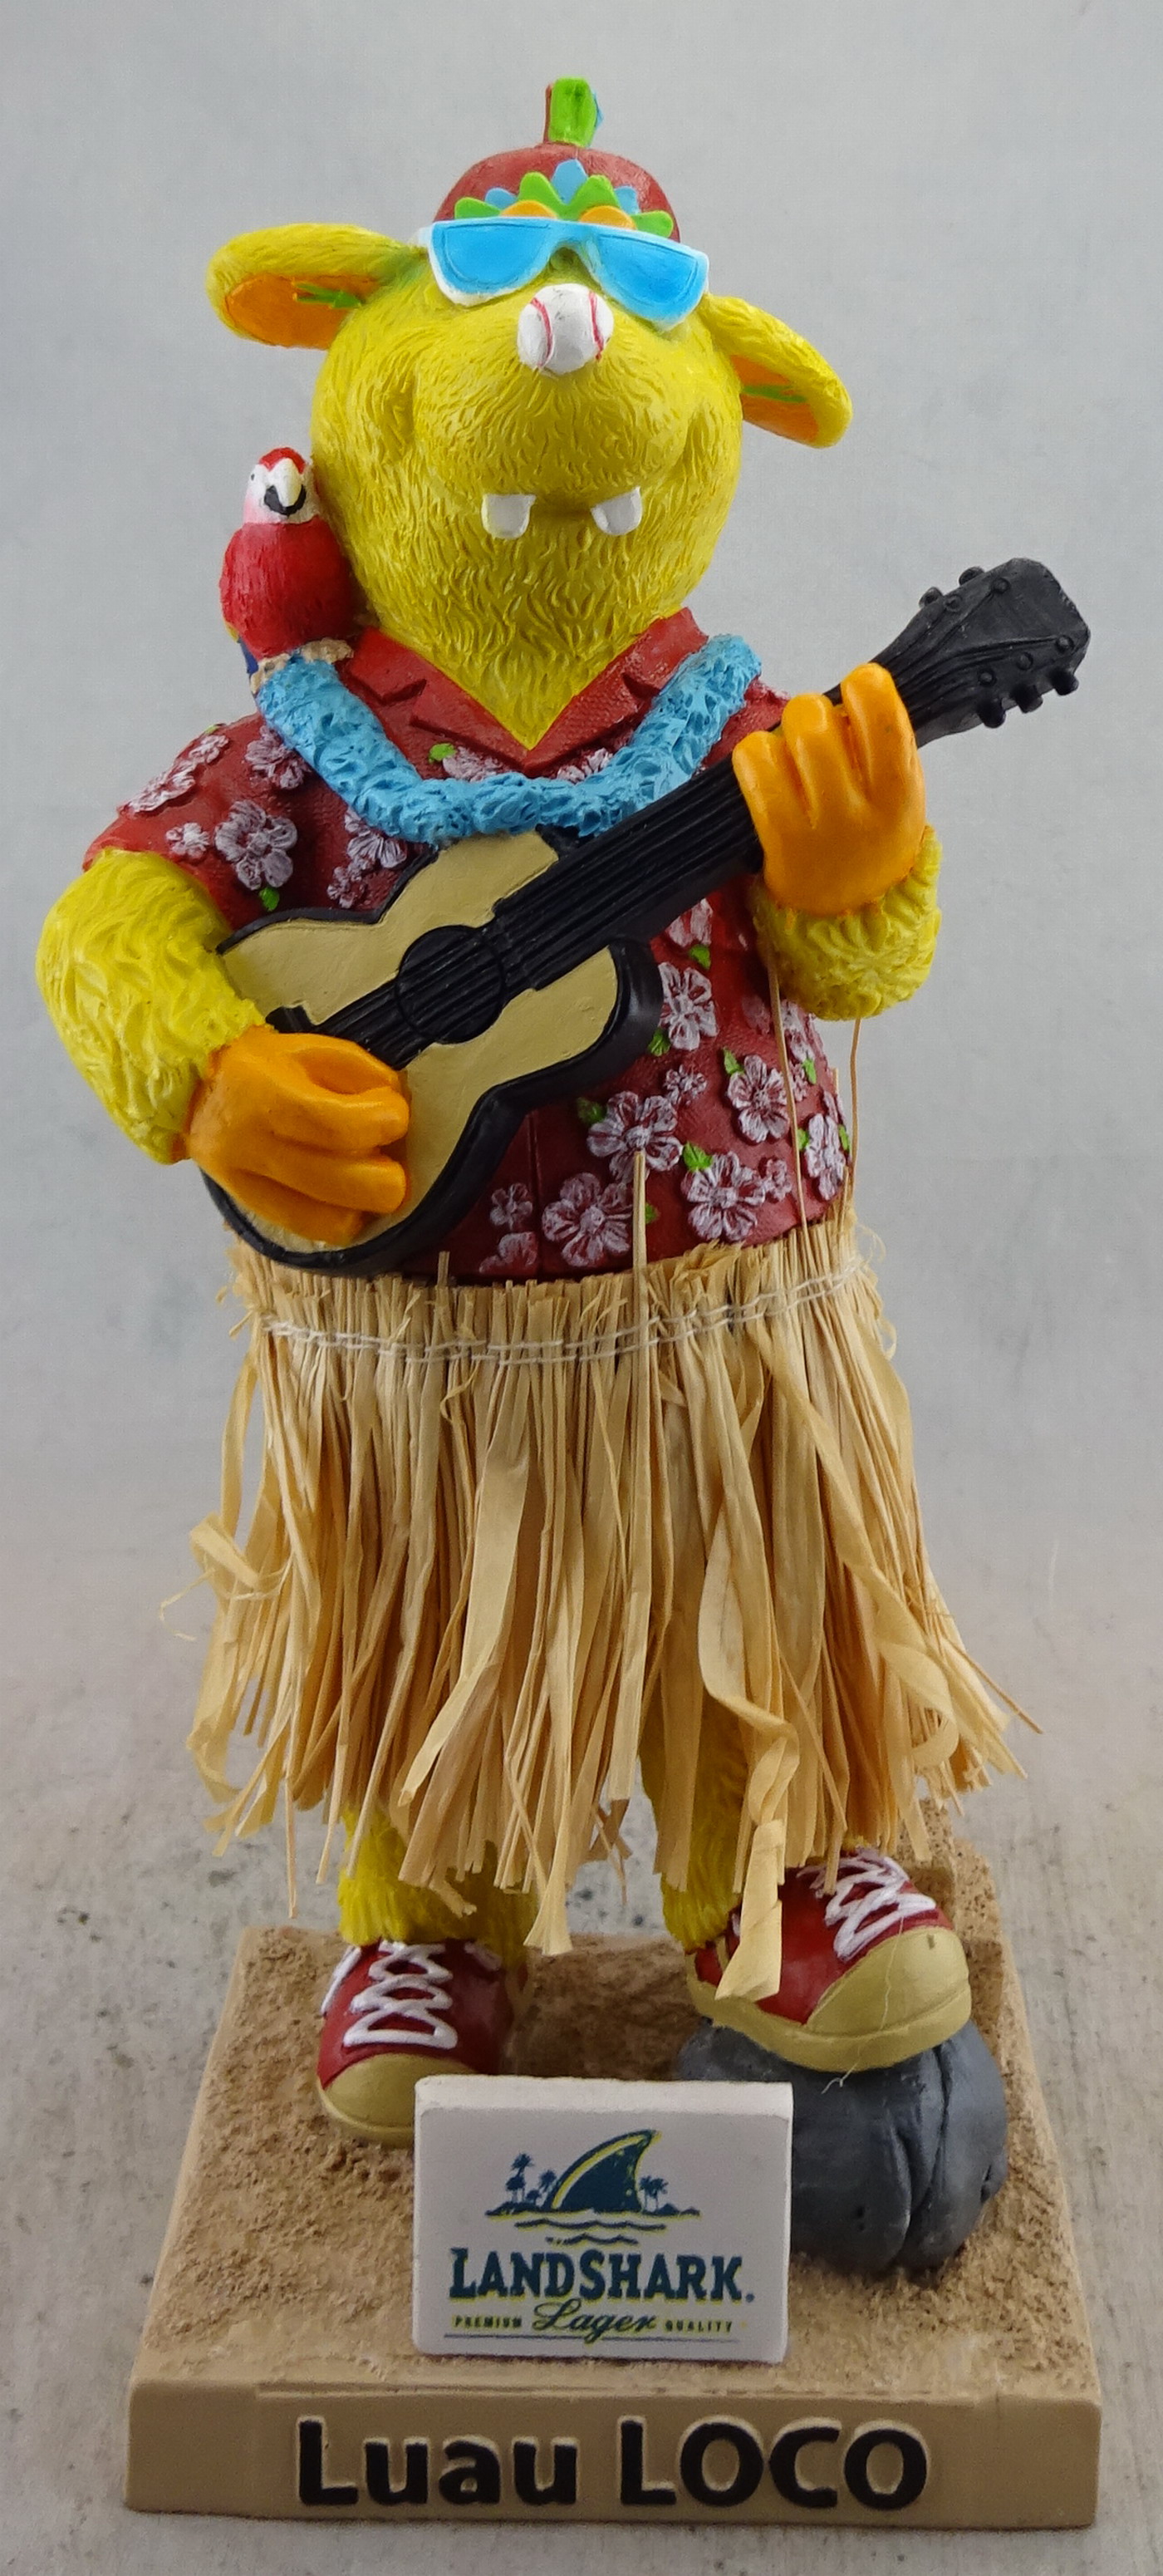 Altoona Curve - Loco with Parrot 112671, 7in Bobblewaist with Grass Skirt (7).jpg